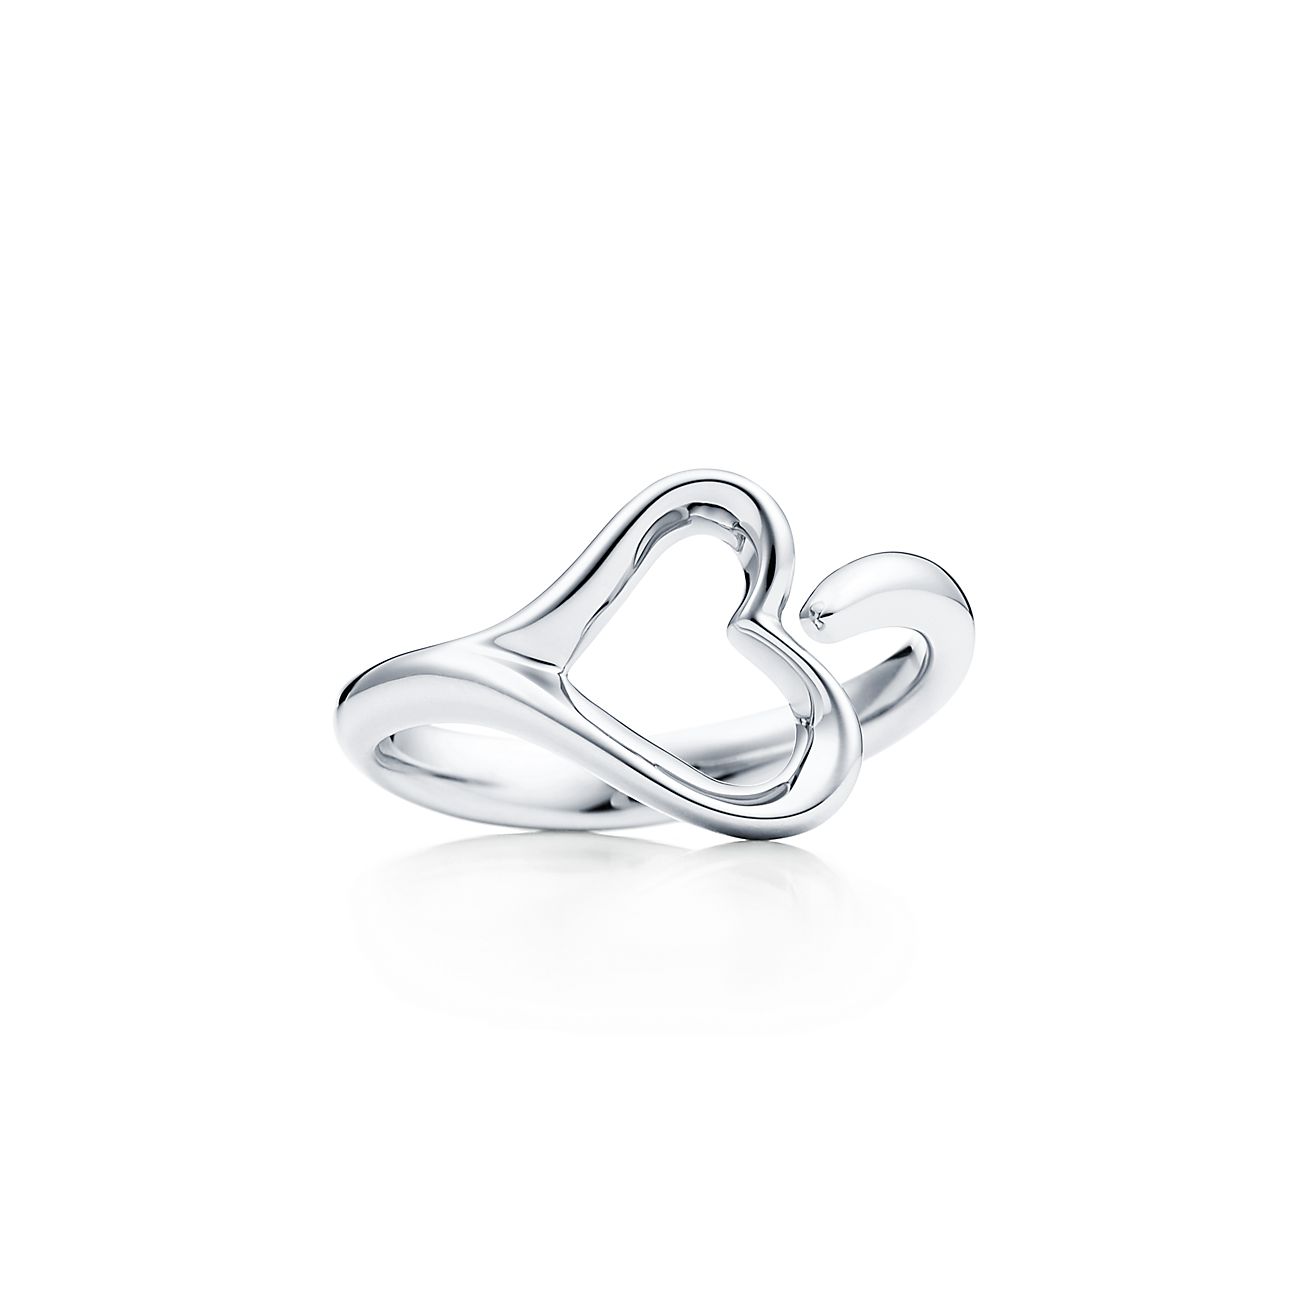 Sterling silver band ring with stamped heart design size 6